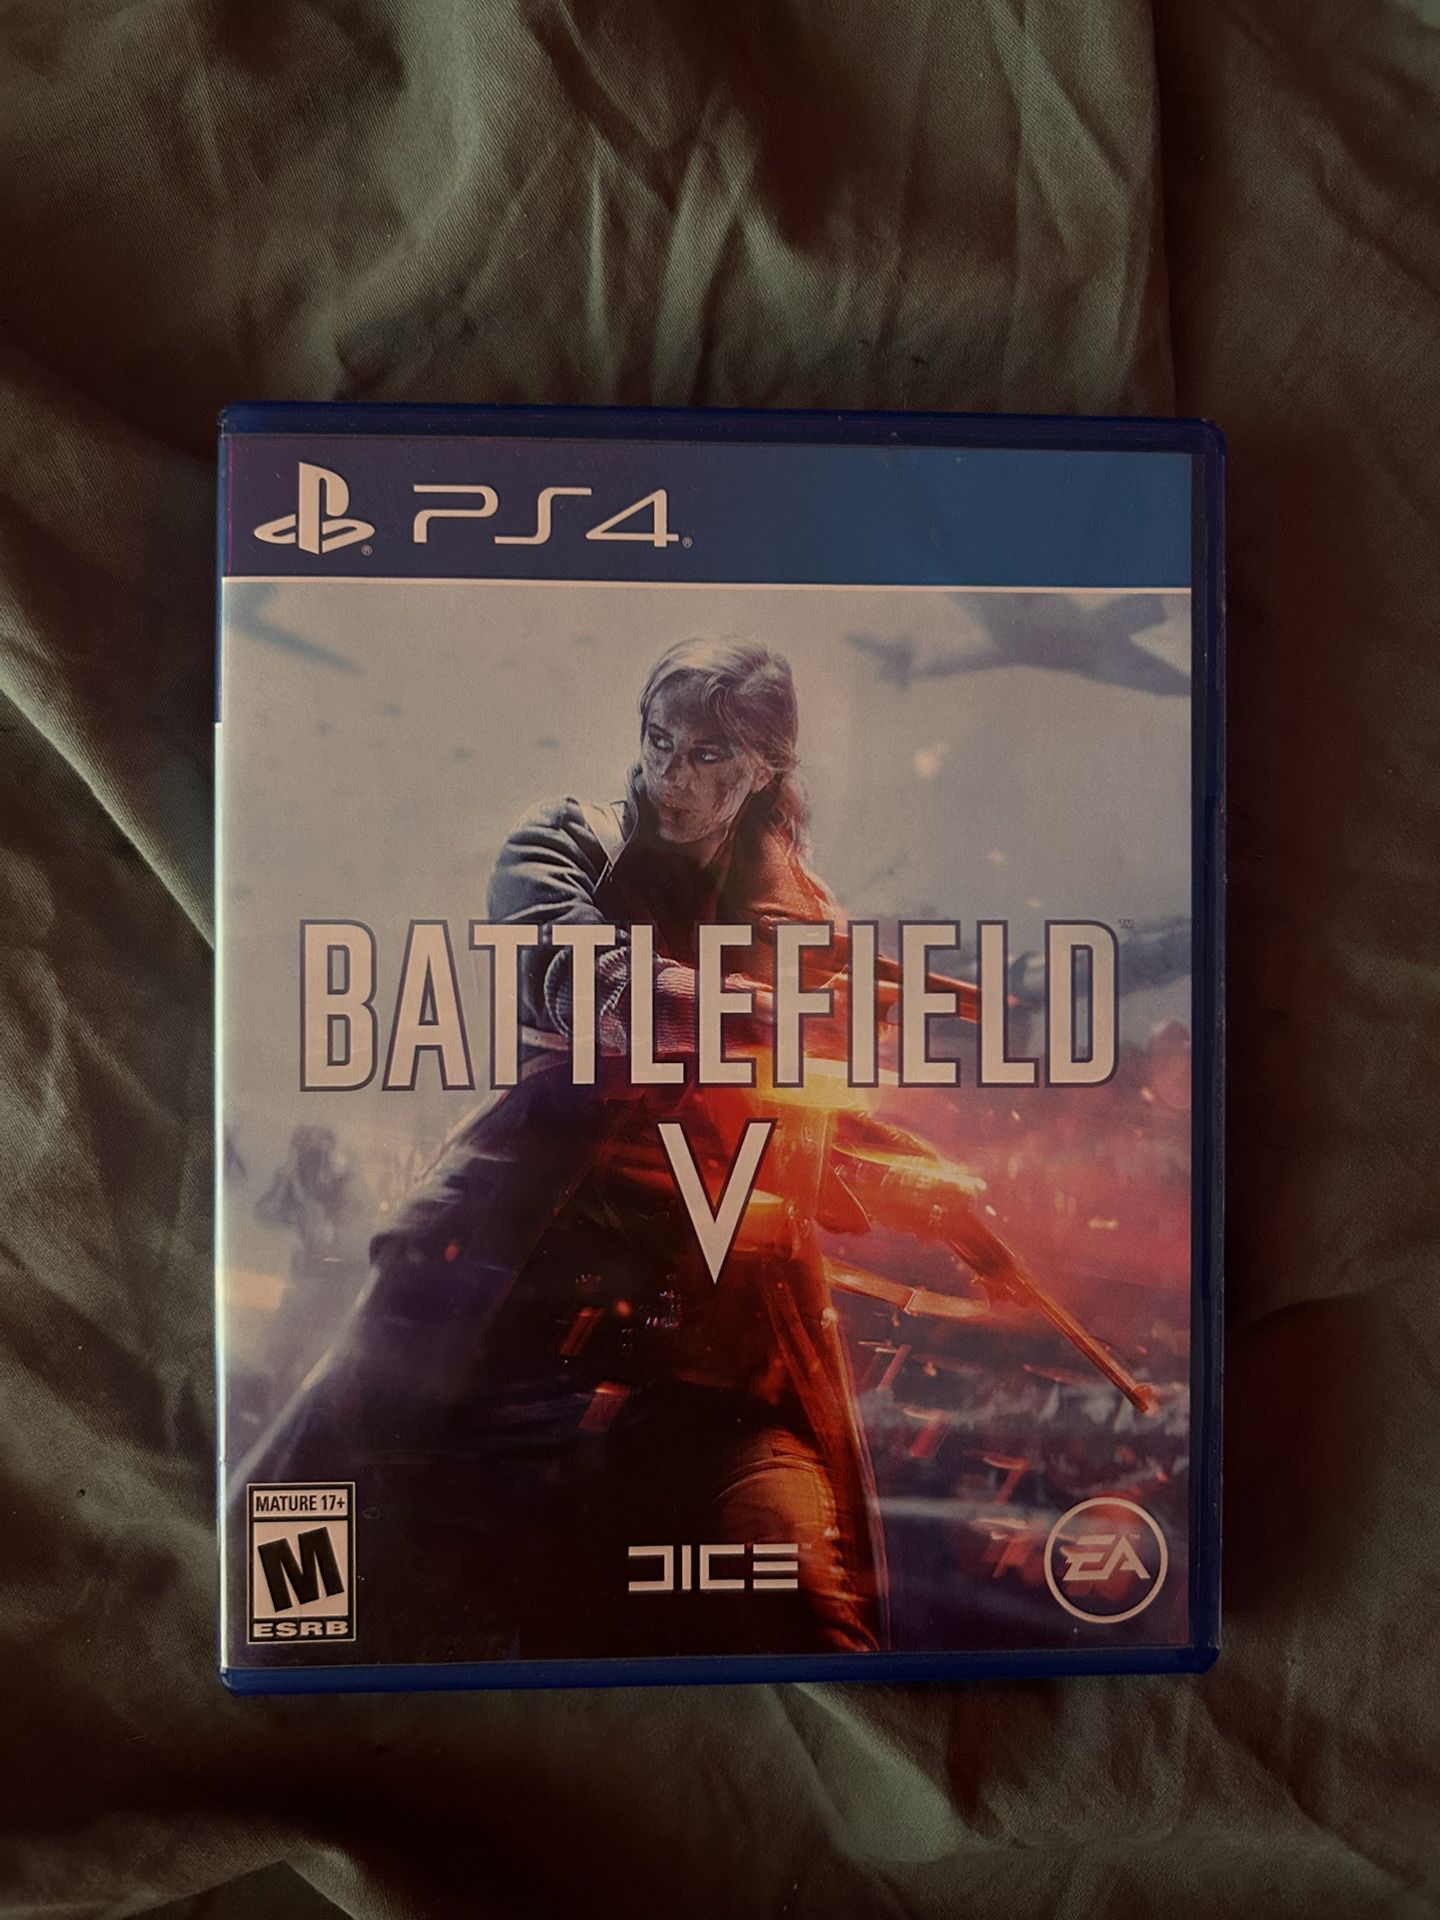 Battlefield 5 for the PS4